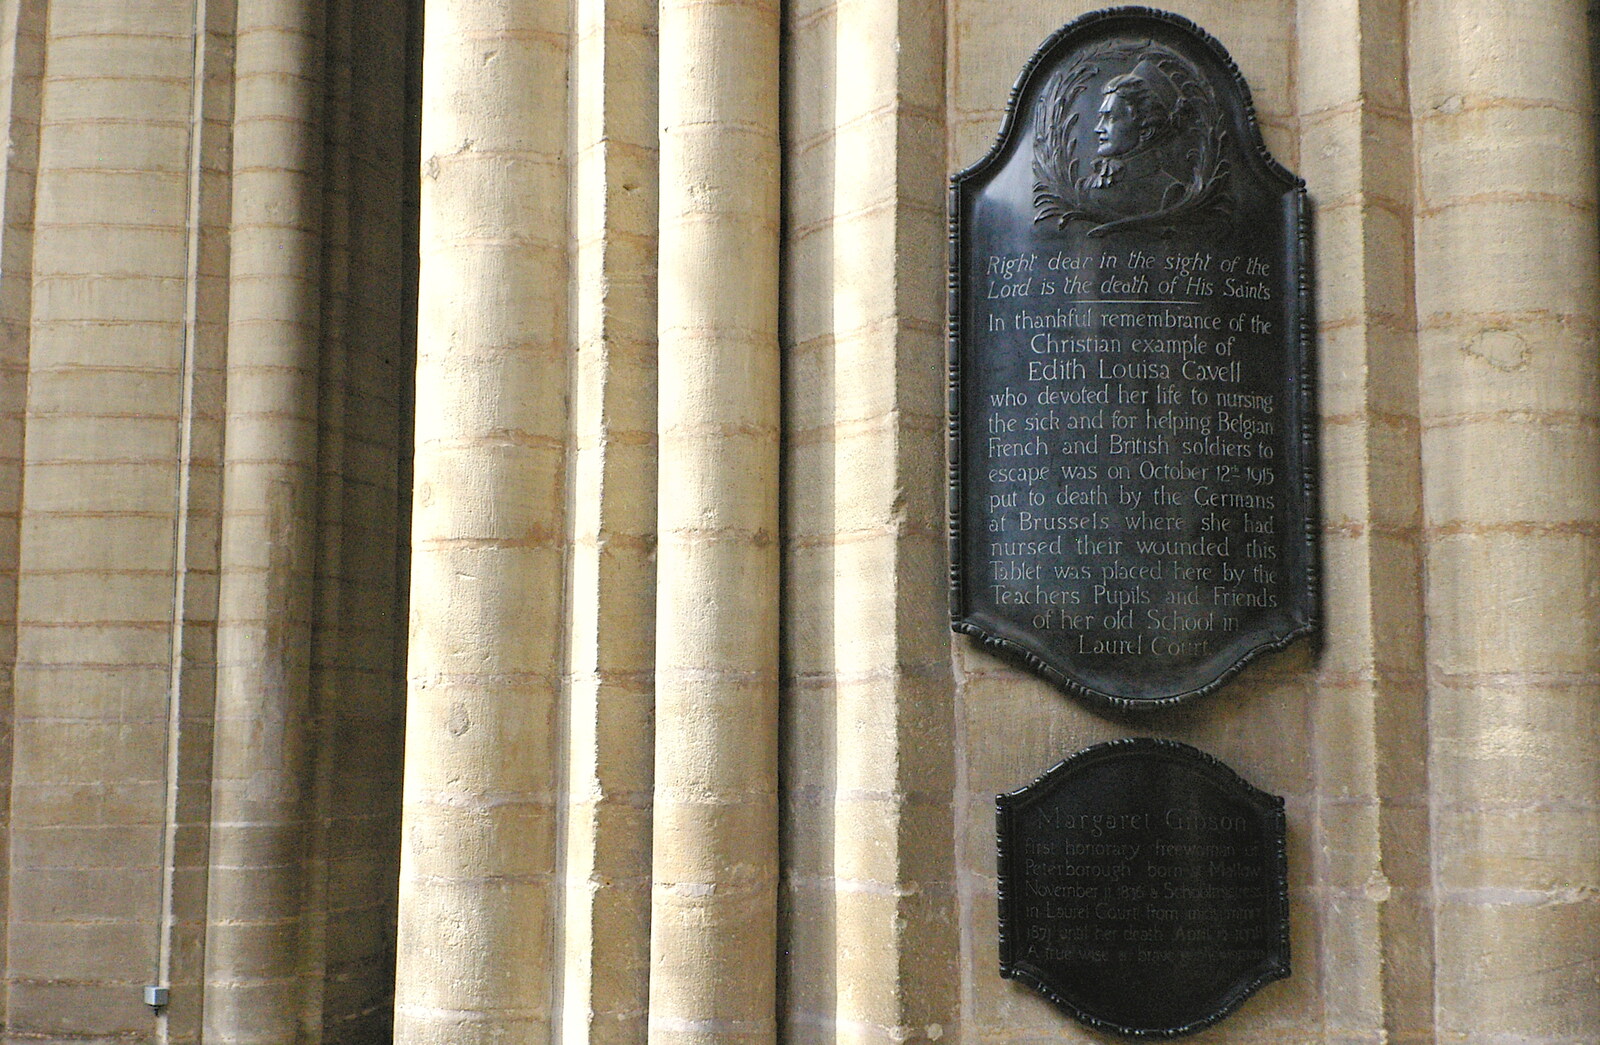 Plaque dedicated to Edith Cavell from Peterborough Cathedral, Cambridgeshire - 7th September 2005